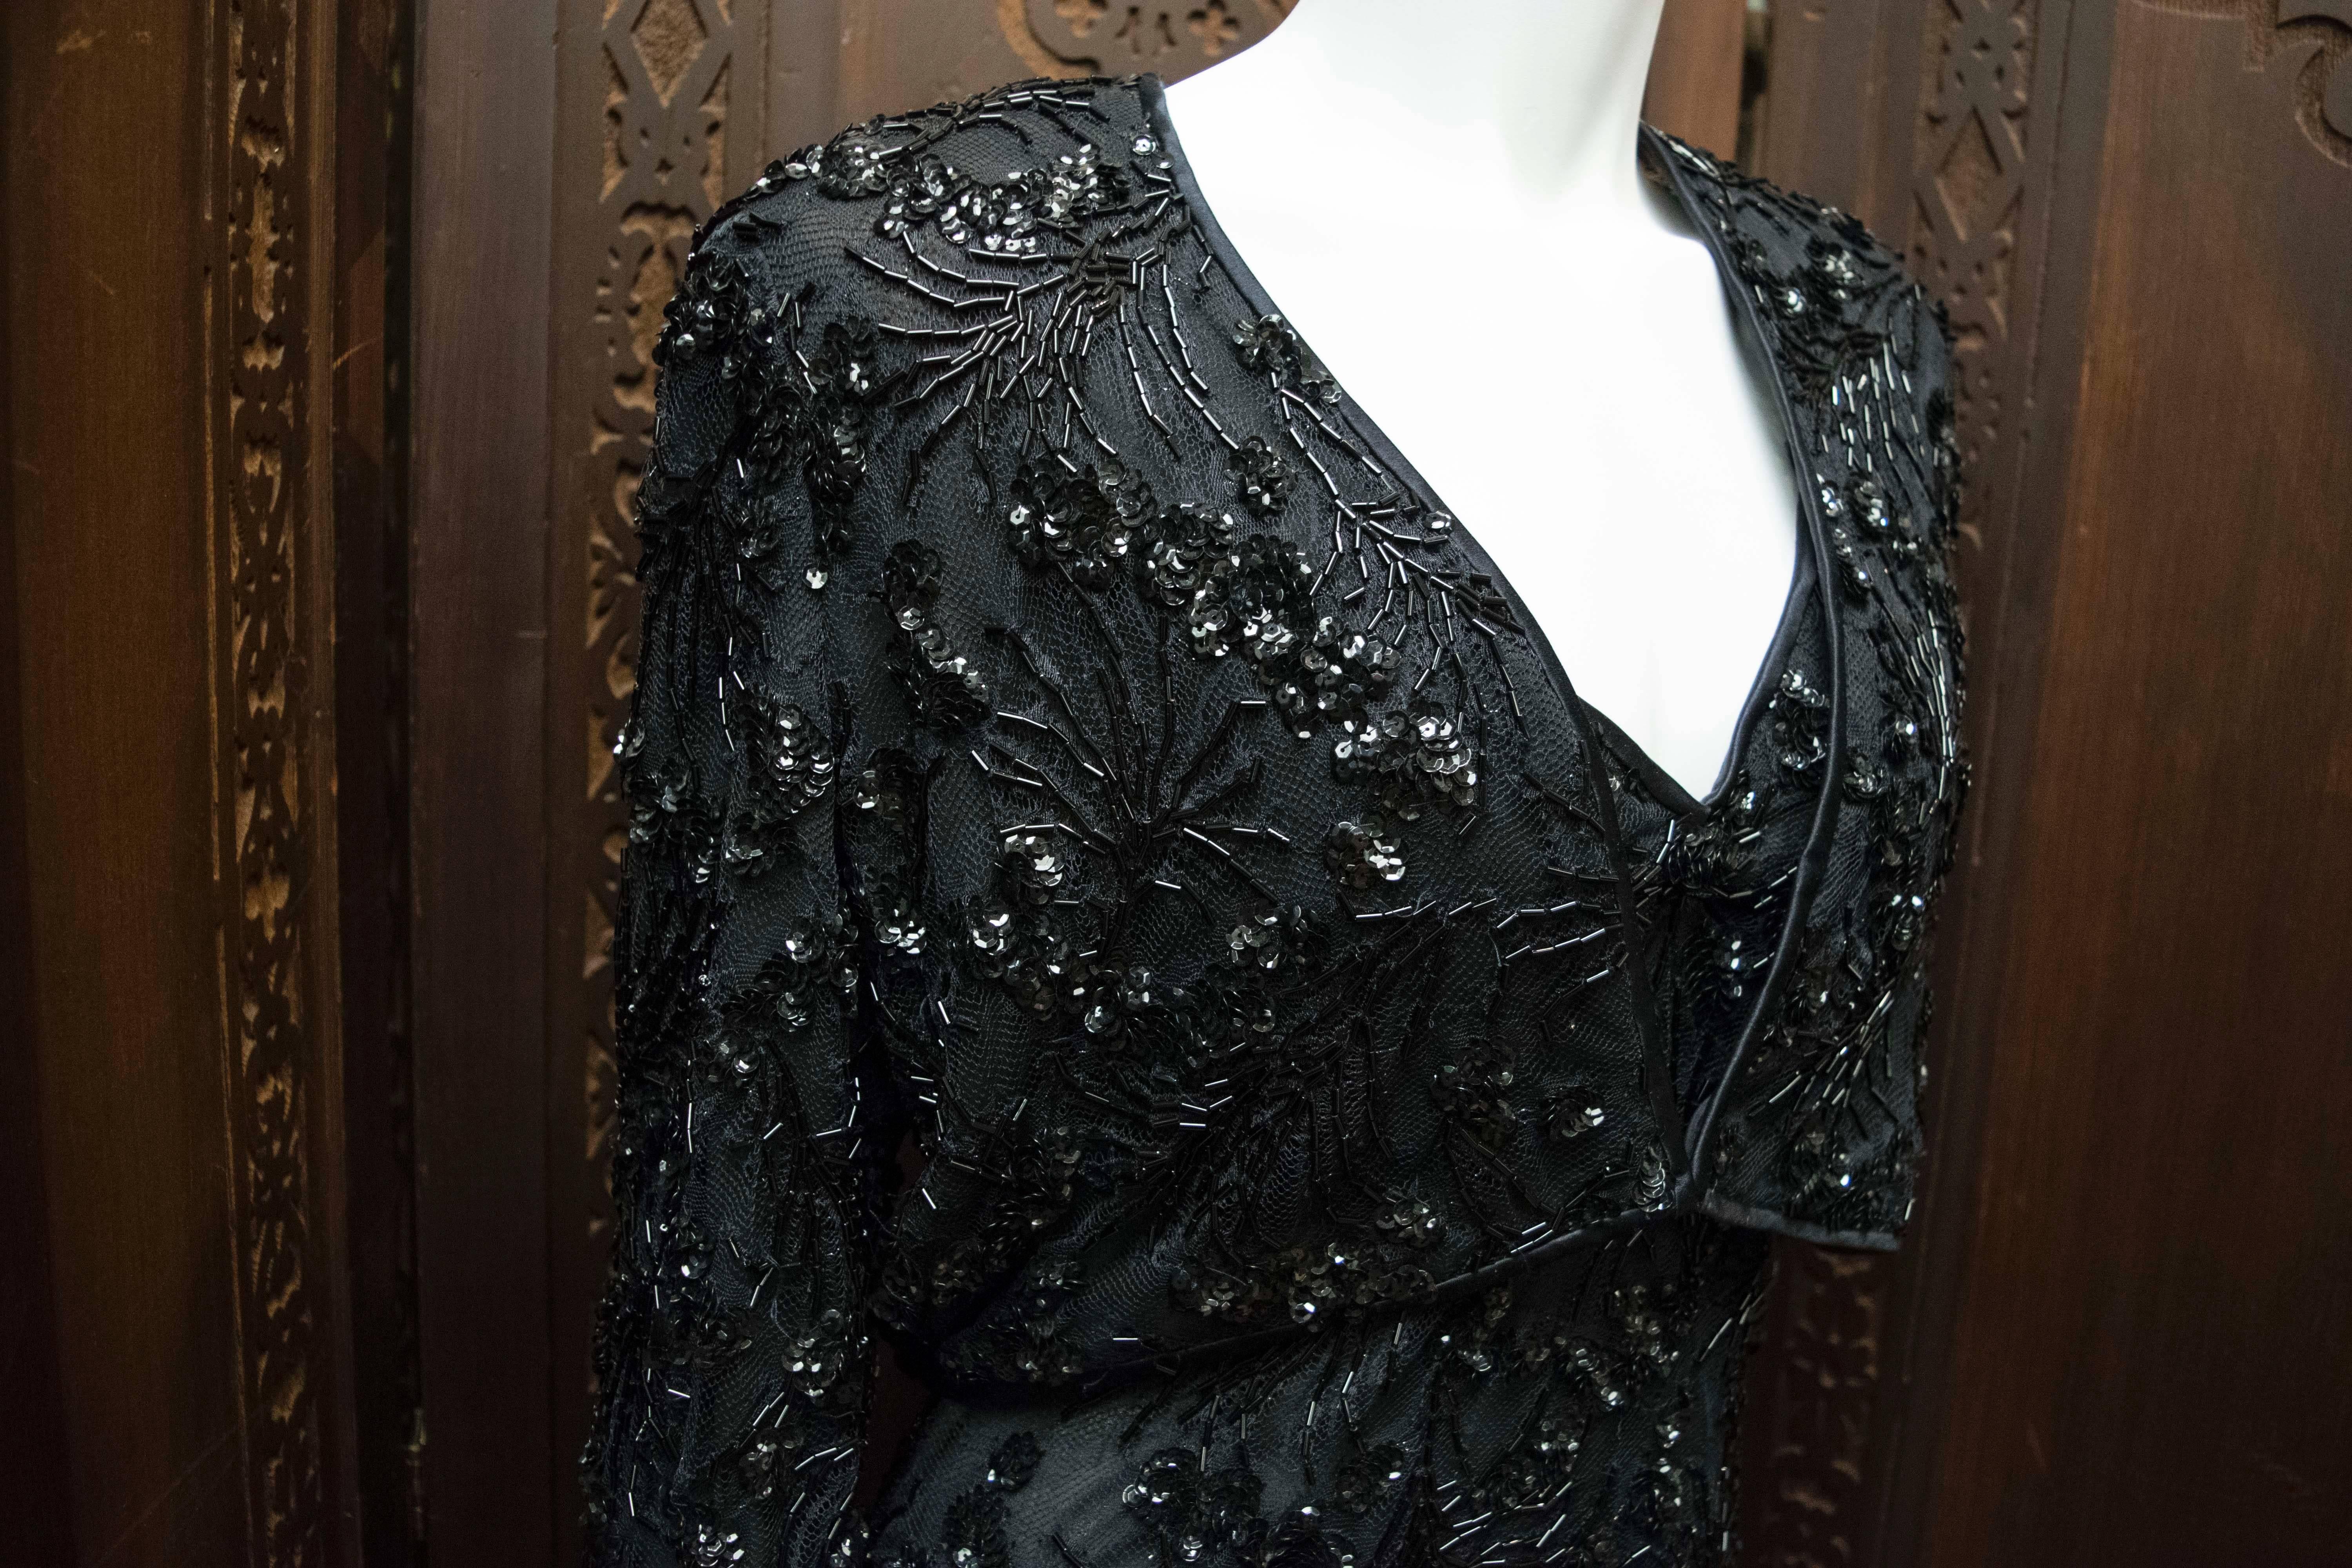 1980s Bob Mackie Black Beaded Two Piece Cocktail Dress and Bolero.
A stunning two piece designed by Bob Mackie. The dress and jacket are covered in hundreds of black beads in a floral pattern and look beautiful together or separate. 
